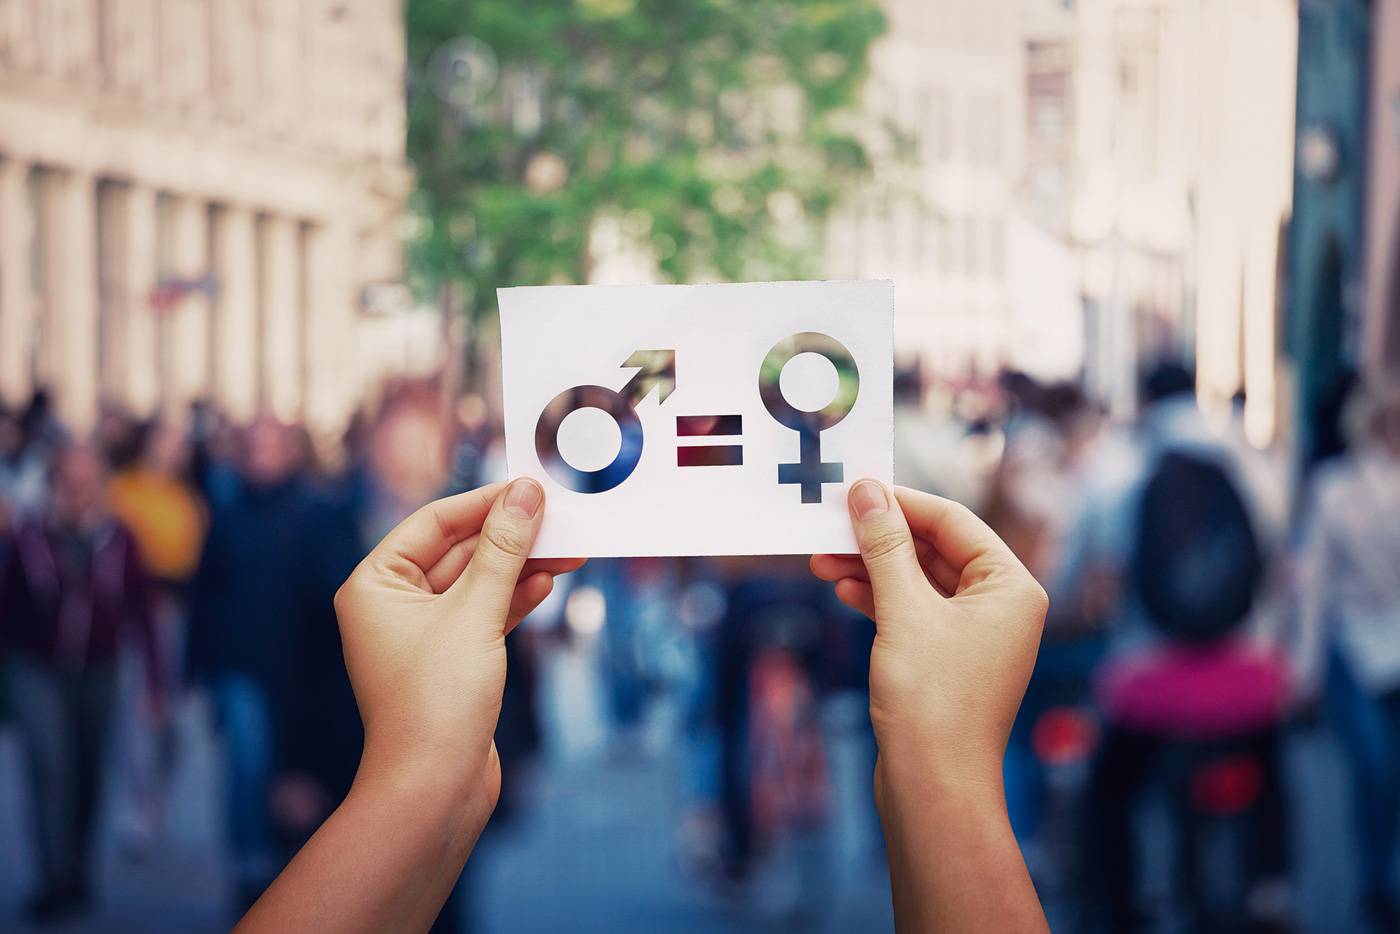 SHARE: Paving Road to True Gender – American-Hellenic Chamber Commerce